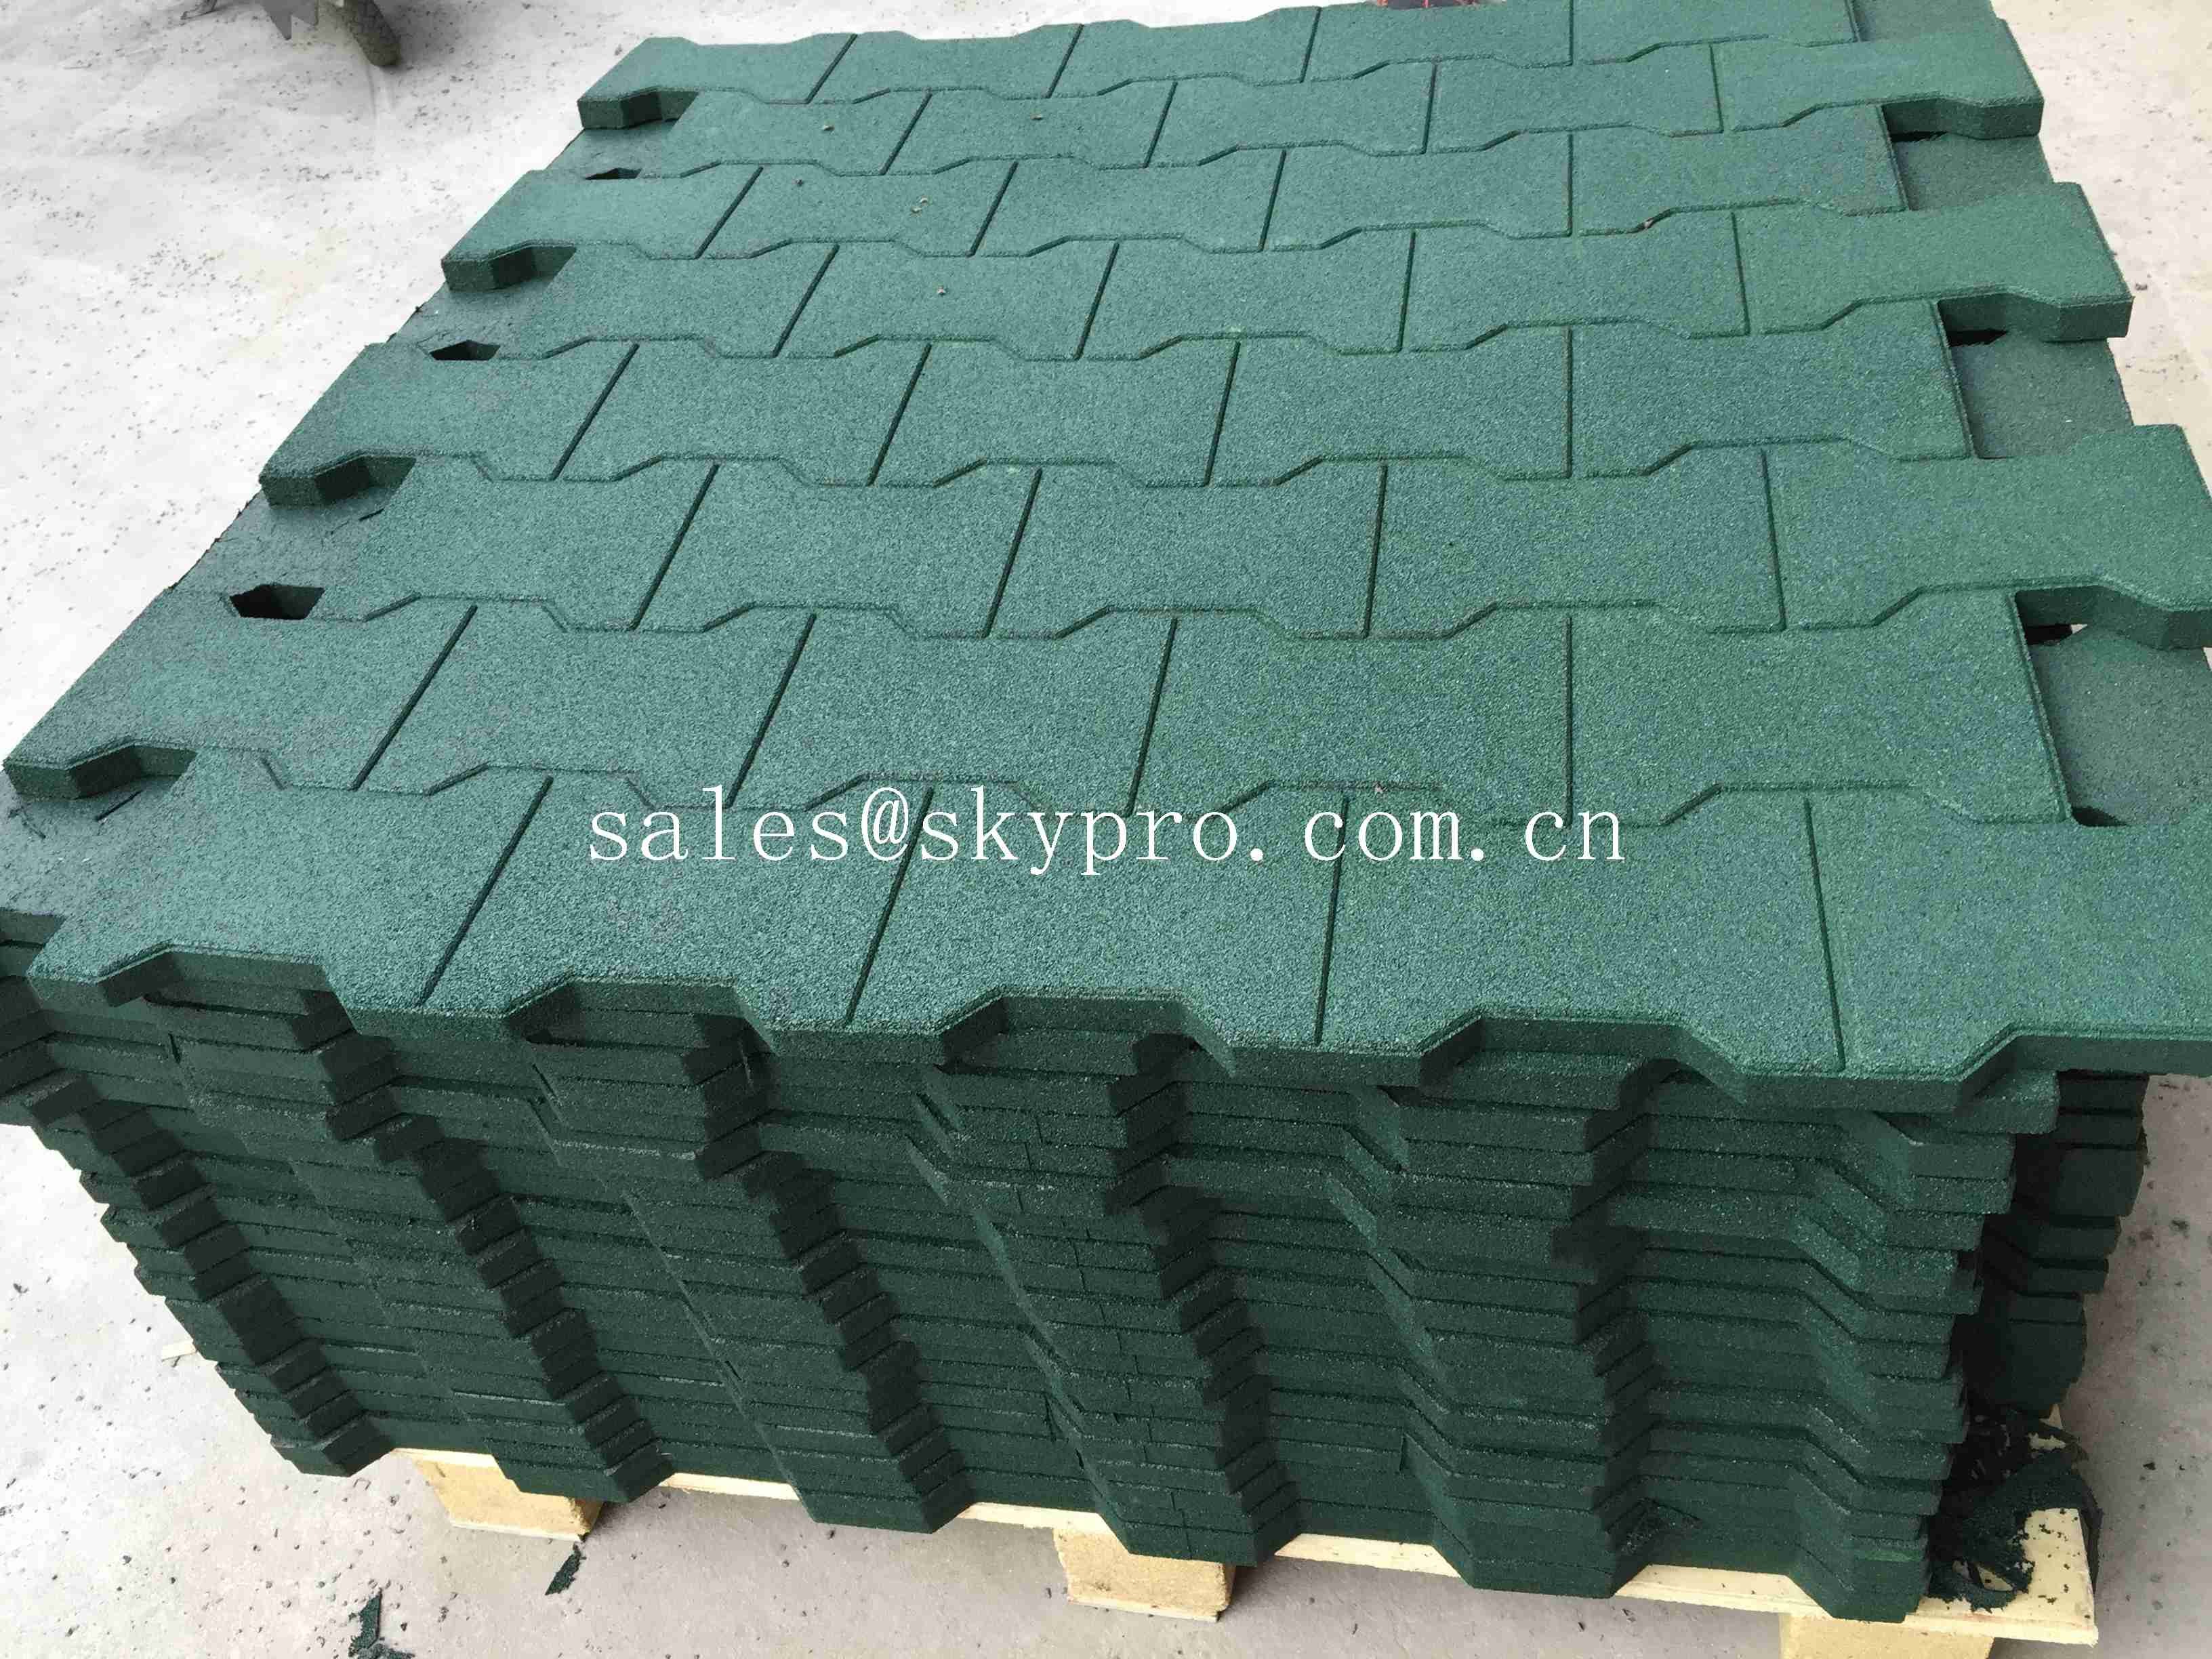 Driveway Rubber Patio Pavers Anti Slip Recycled Rubber